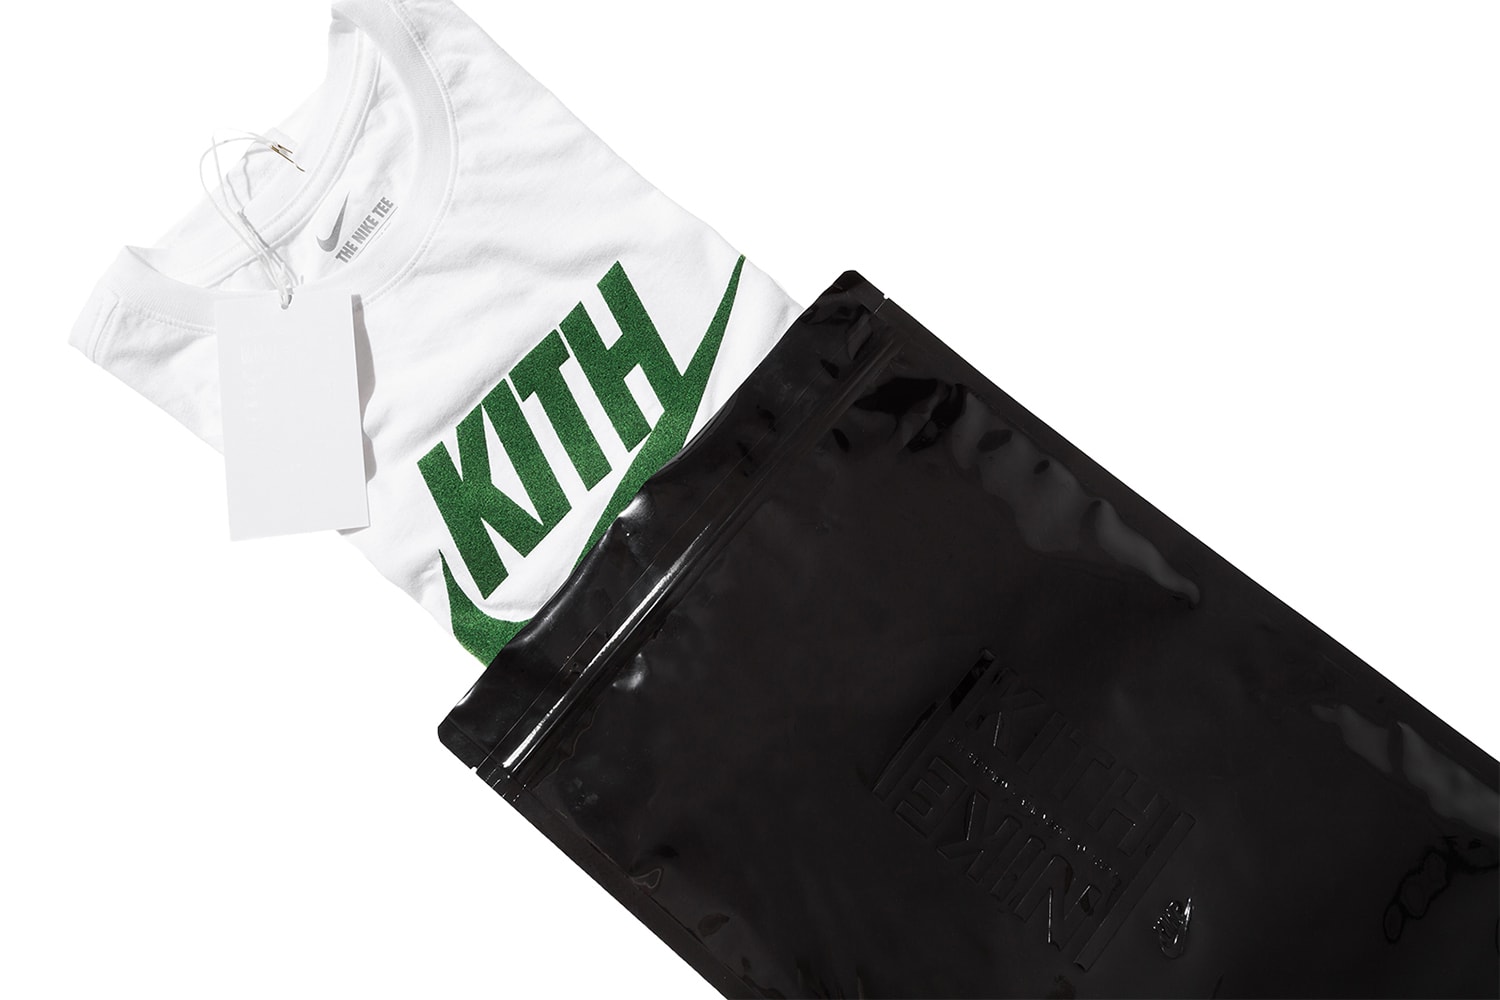 KITH x Nike Limited Edition Tennis-Inspired Shirts